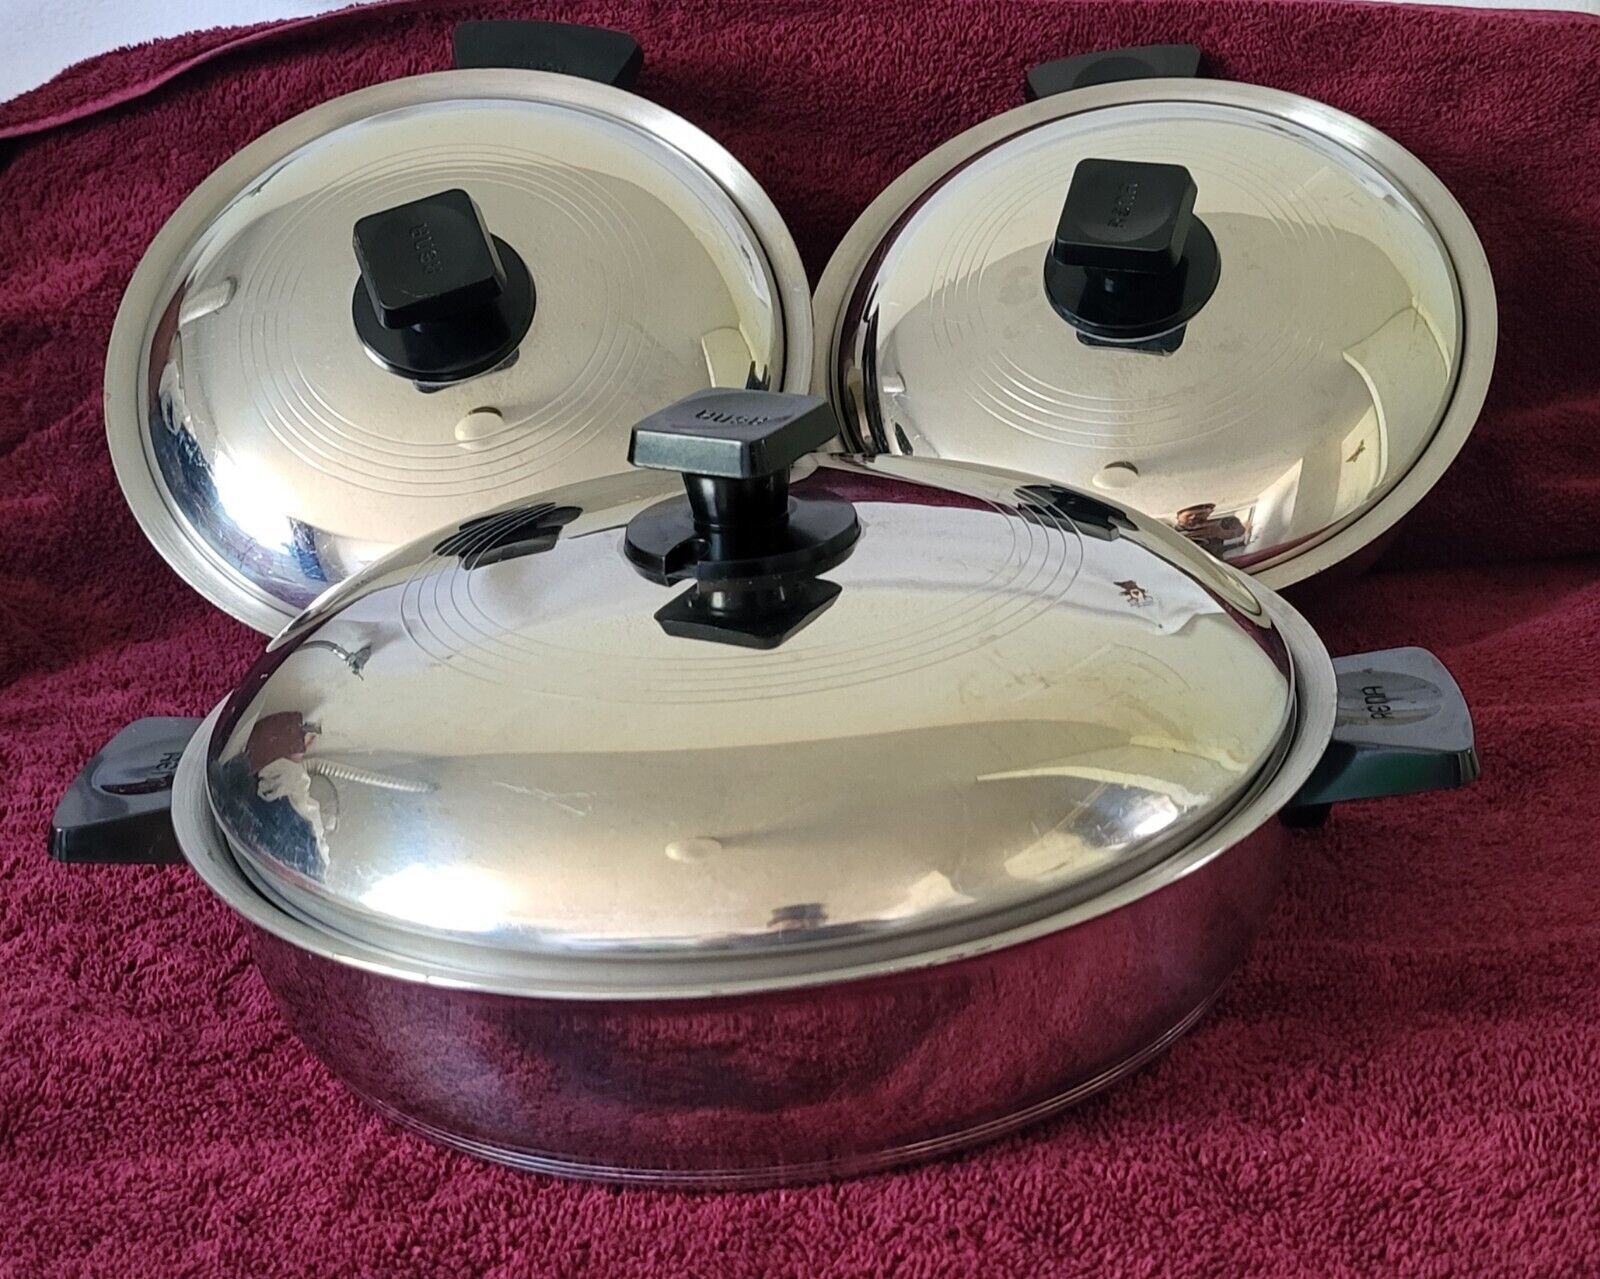 Vtg Rena Ware 3 Ply 18-8 Stainless Steel Pot Pan W/lids Set Of 3 USA Made